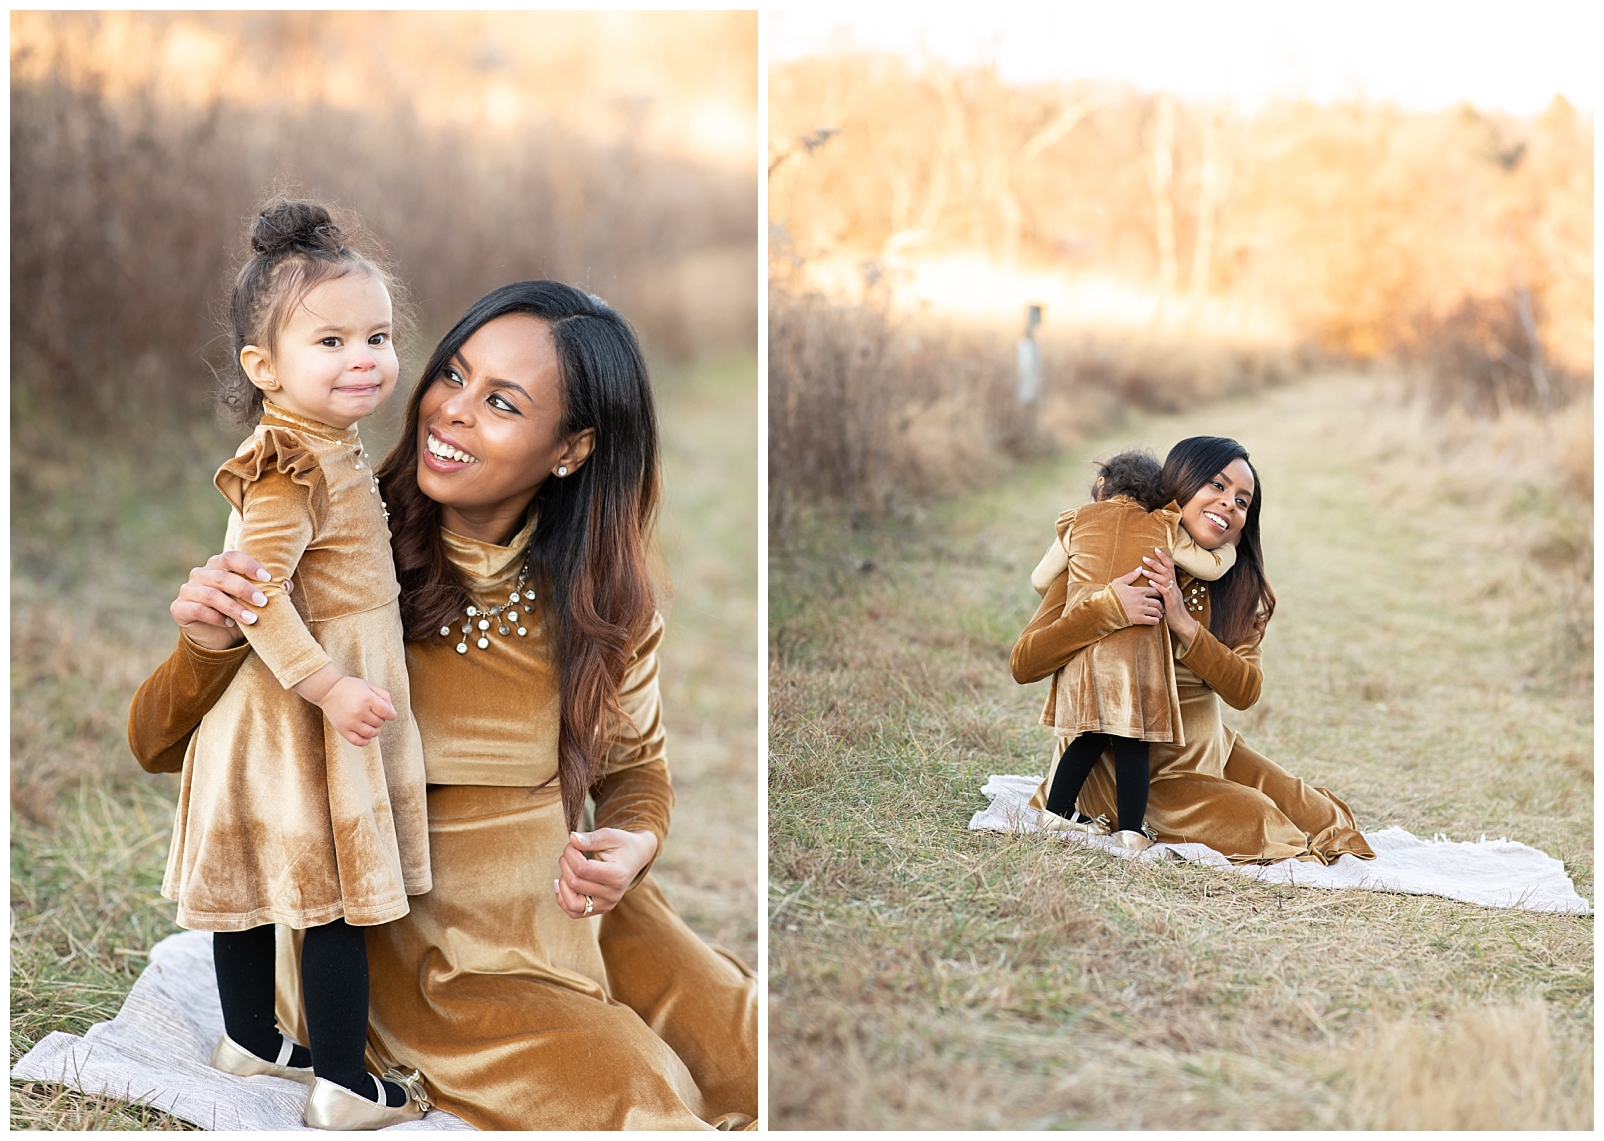 Lady wearing a golden dress in a field with daughter